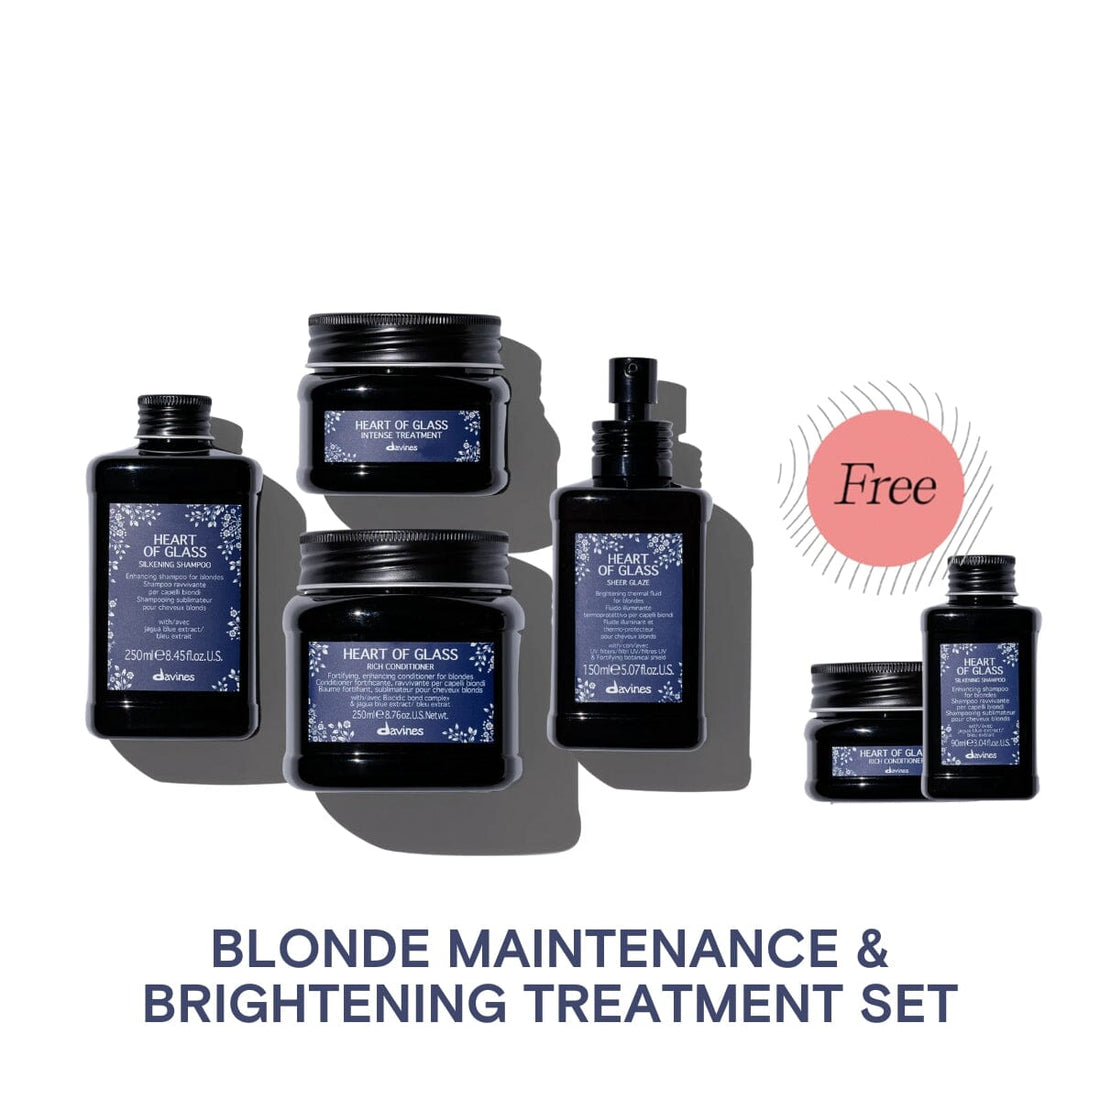 Davines Heart of Glass Ultimate Blonde Care Set w/ FREE Travel-Sized Shampoo & Conditioner - HairMNL